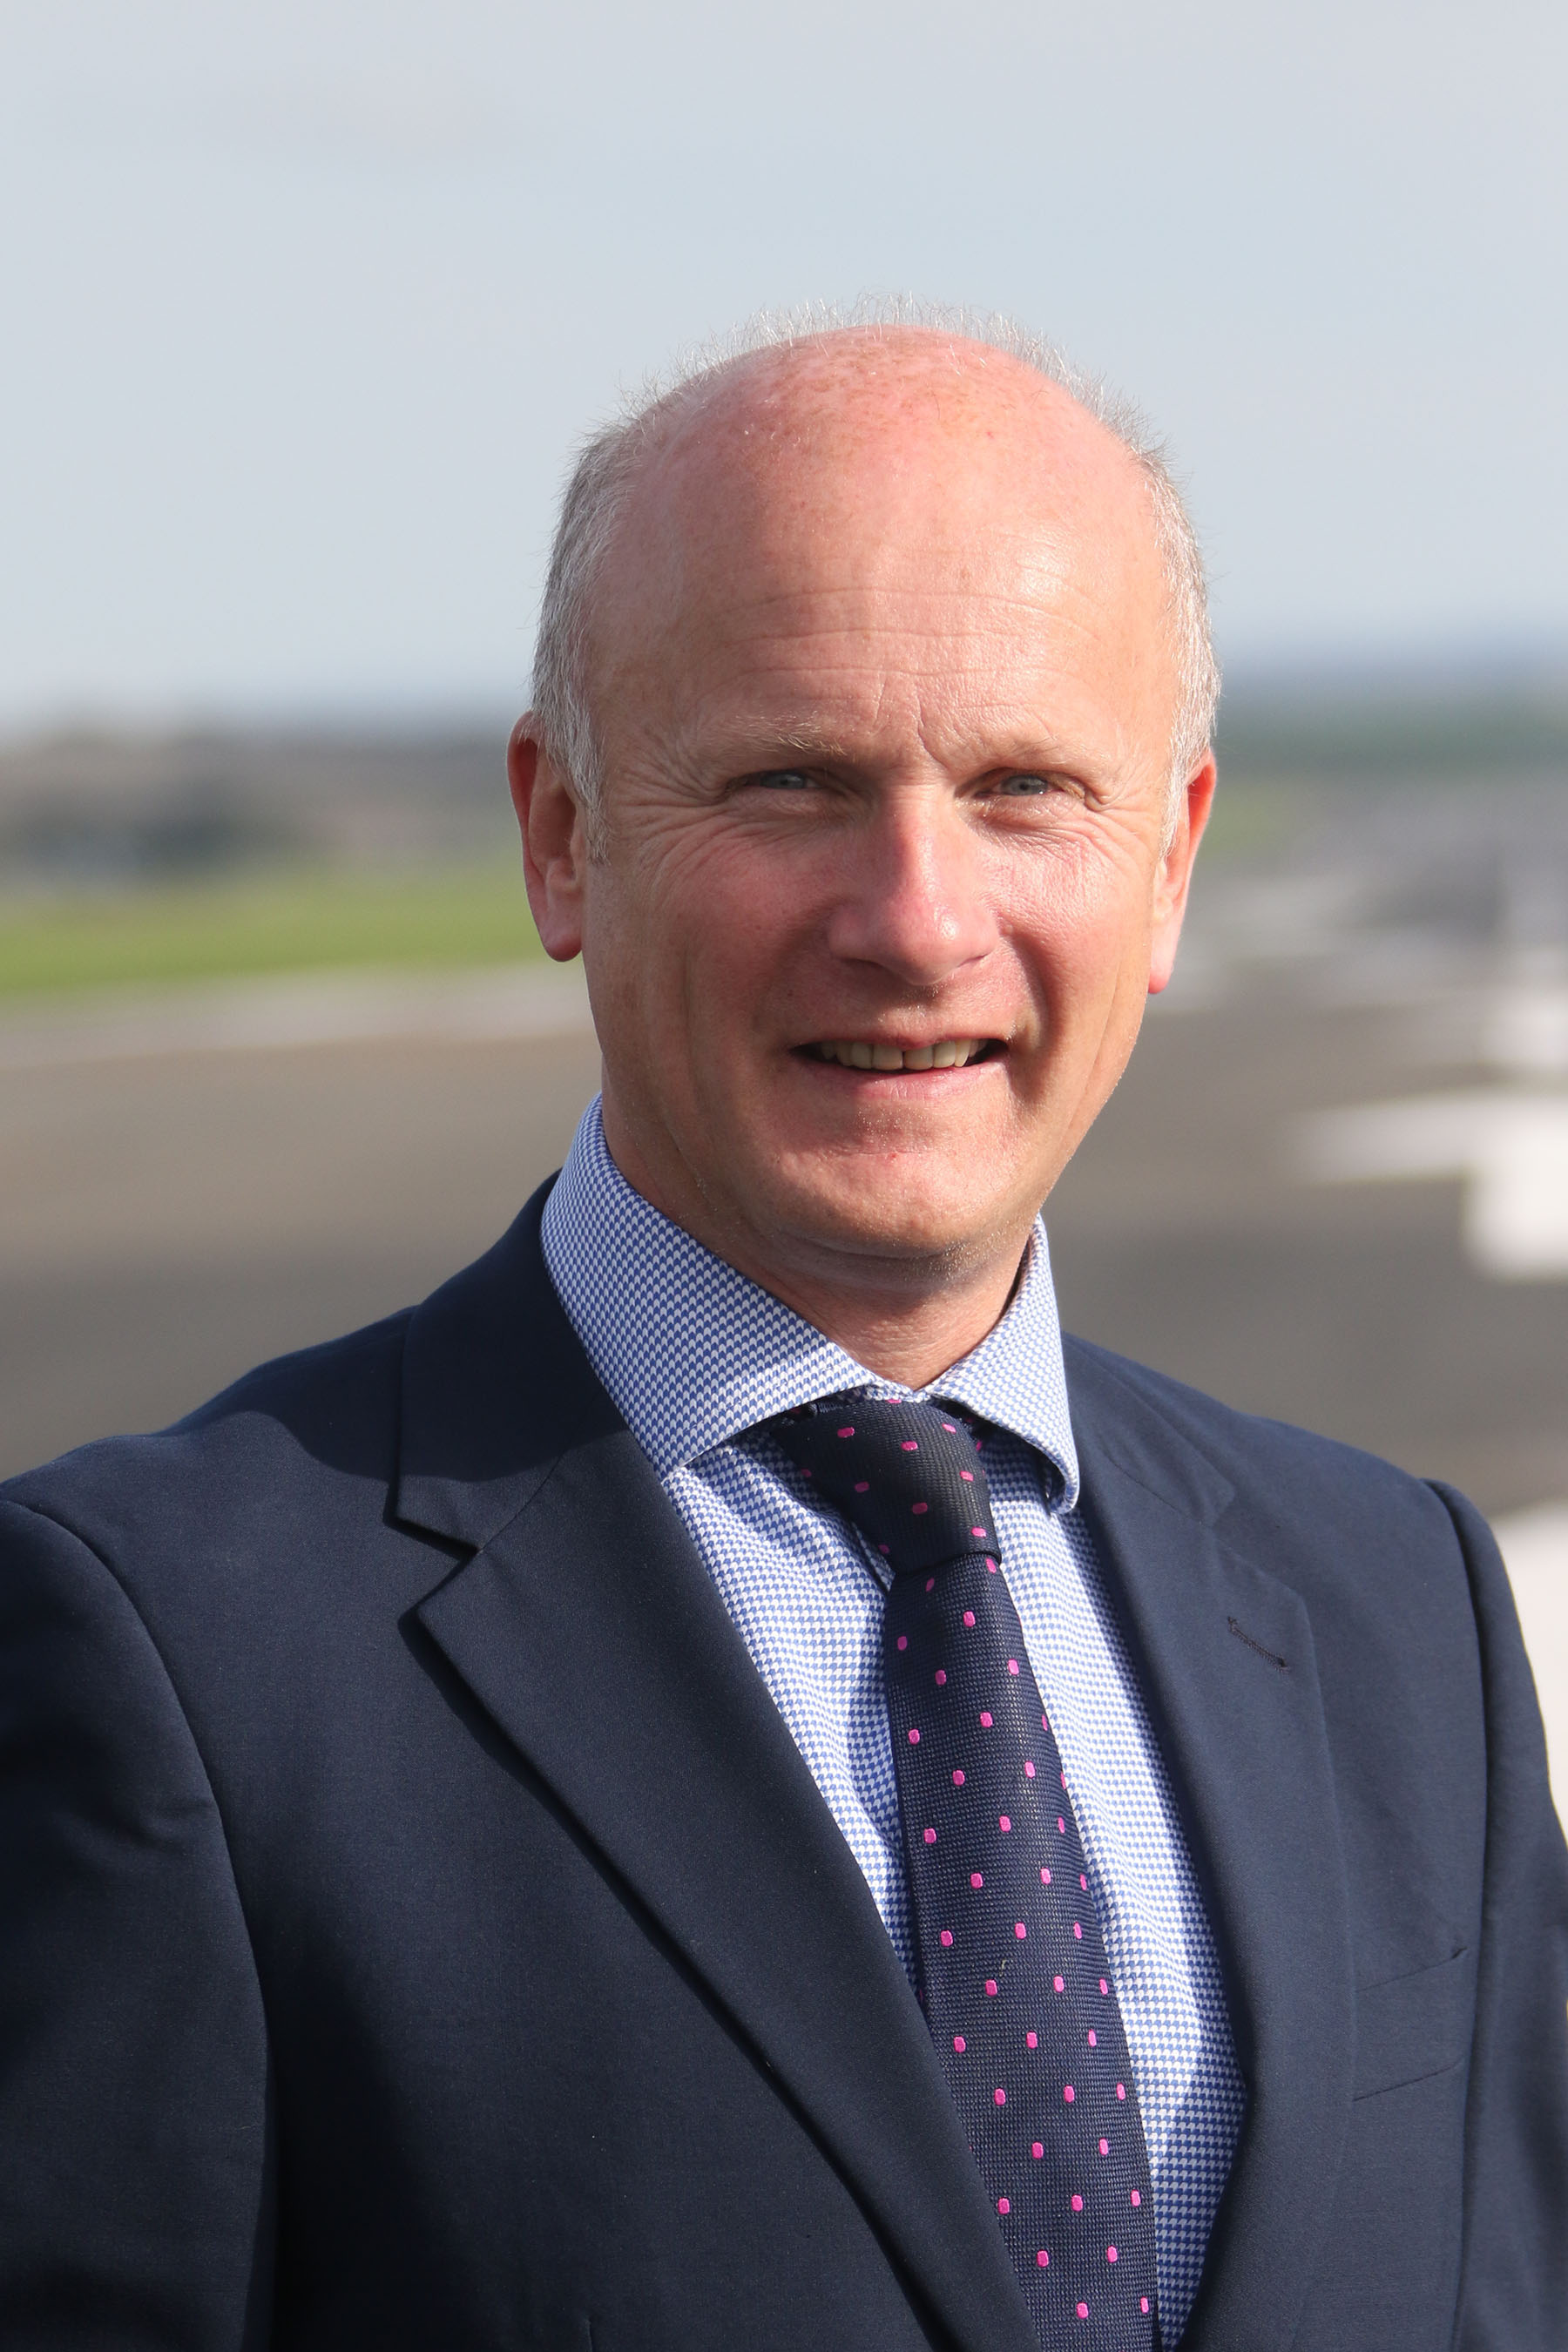 Glasgow Prestwick Airport weathers a tough year of lockdown to post operating profit